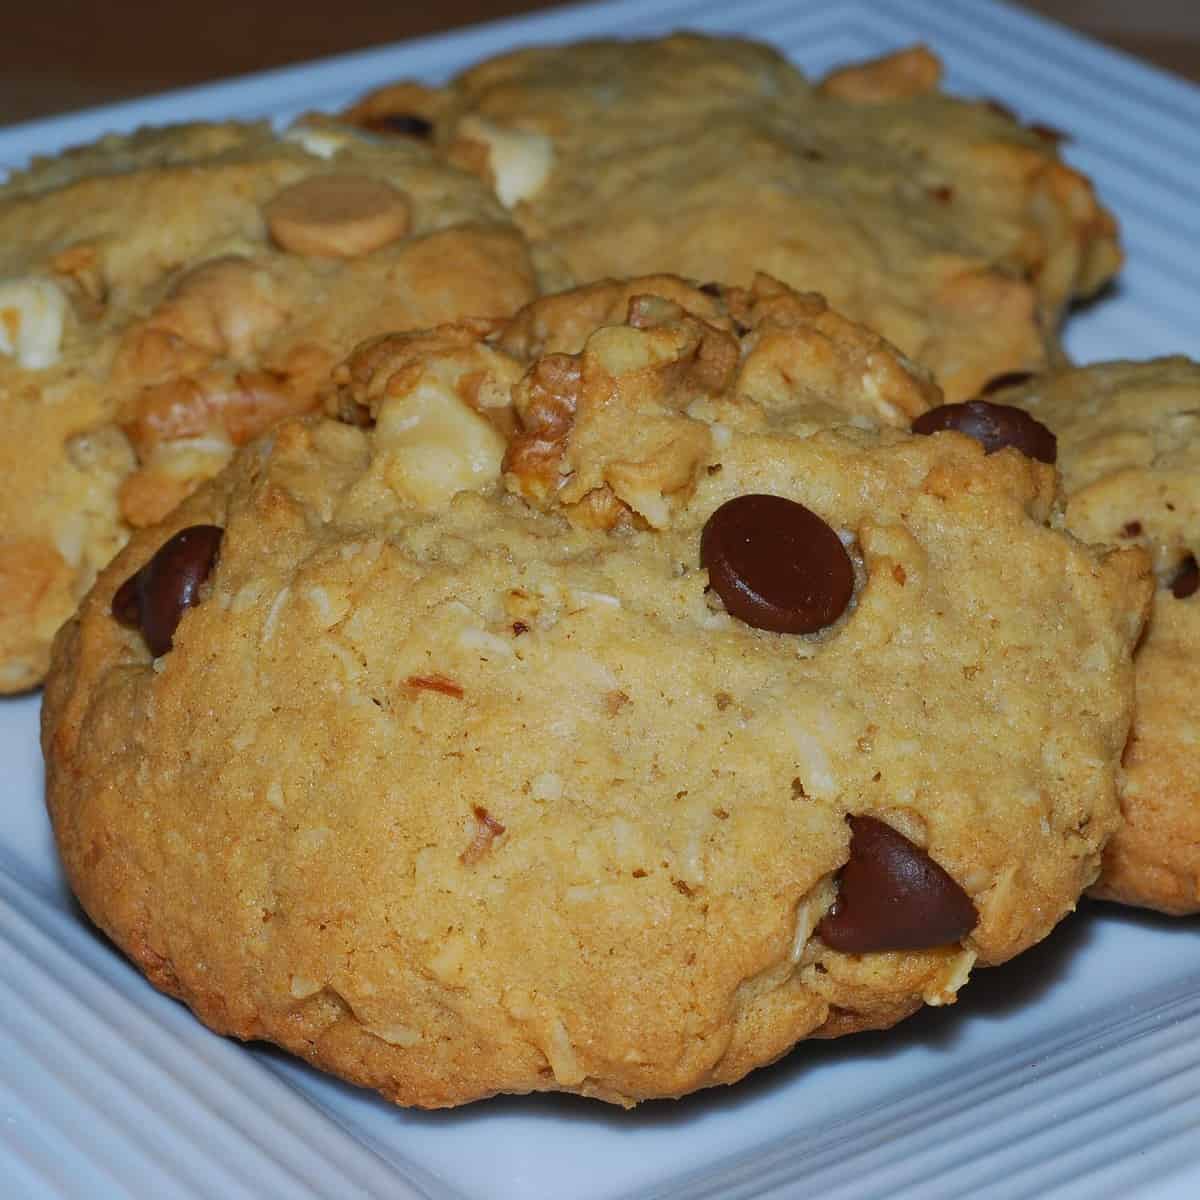  You won't be able to resist the warm and comforting aroma of freshly baked Banana Everything Cookies!